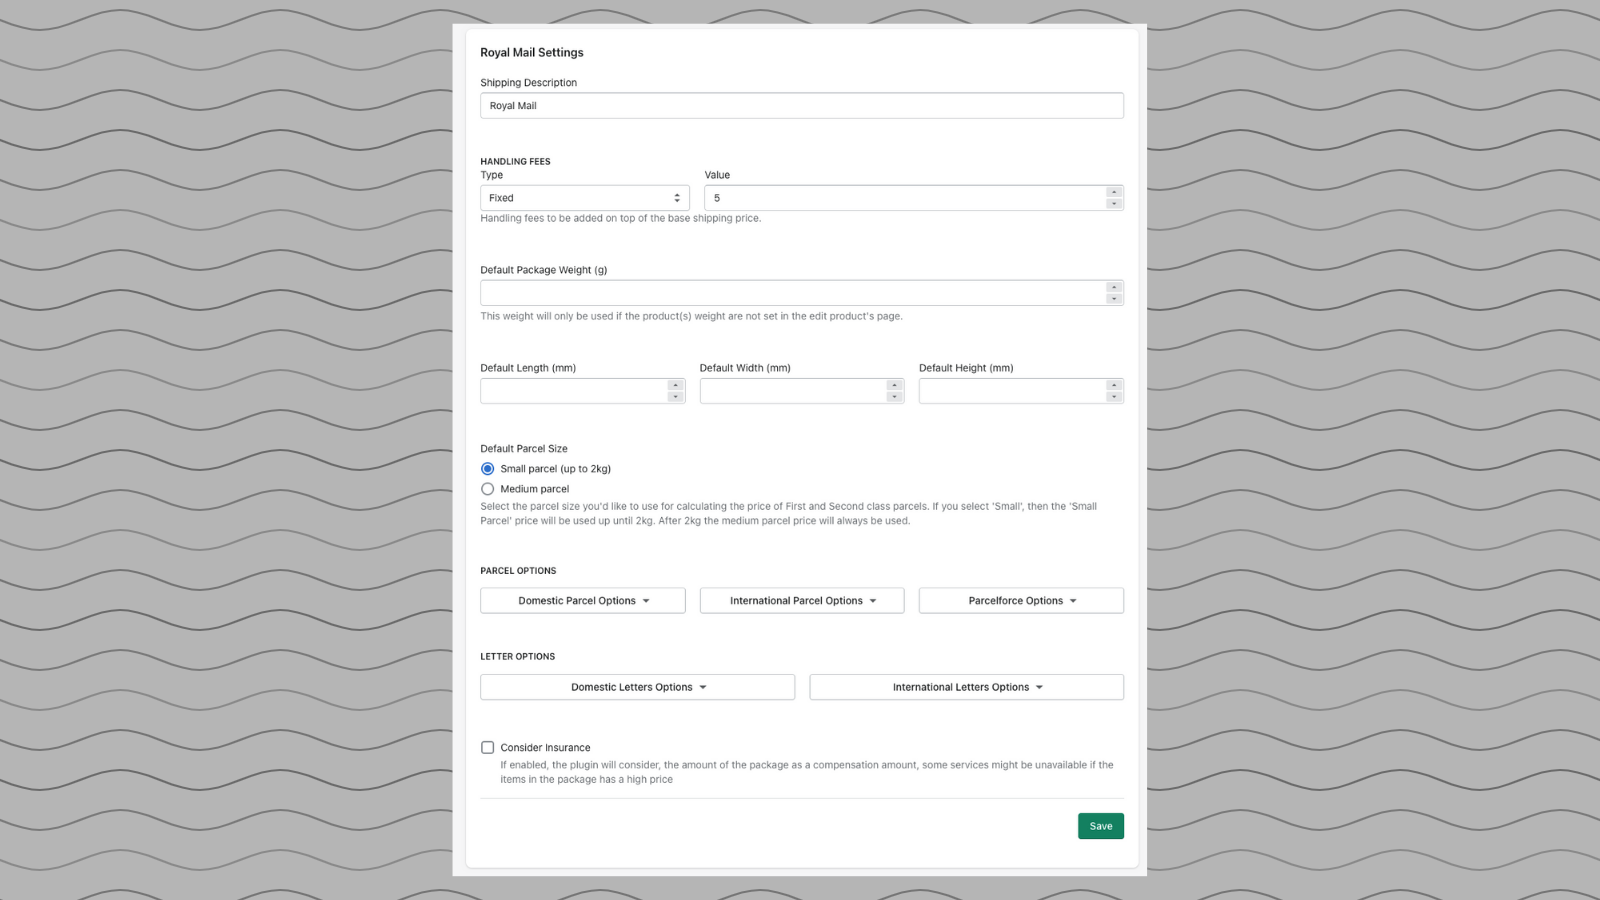 Flexible settings page to suit your store needs.